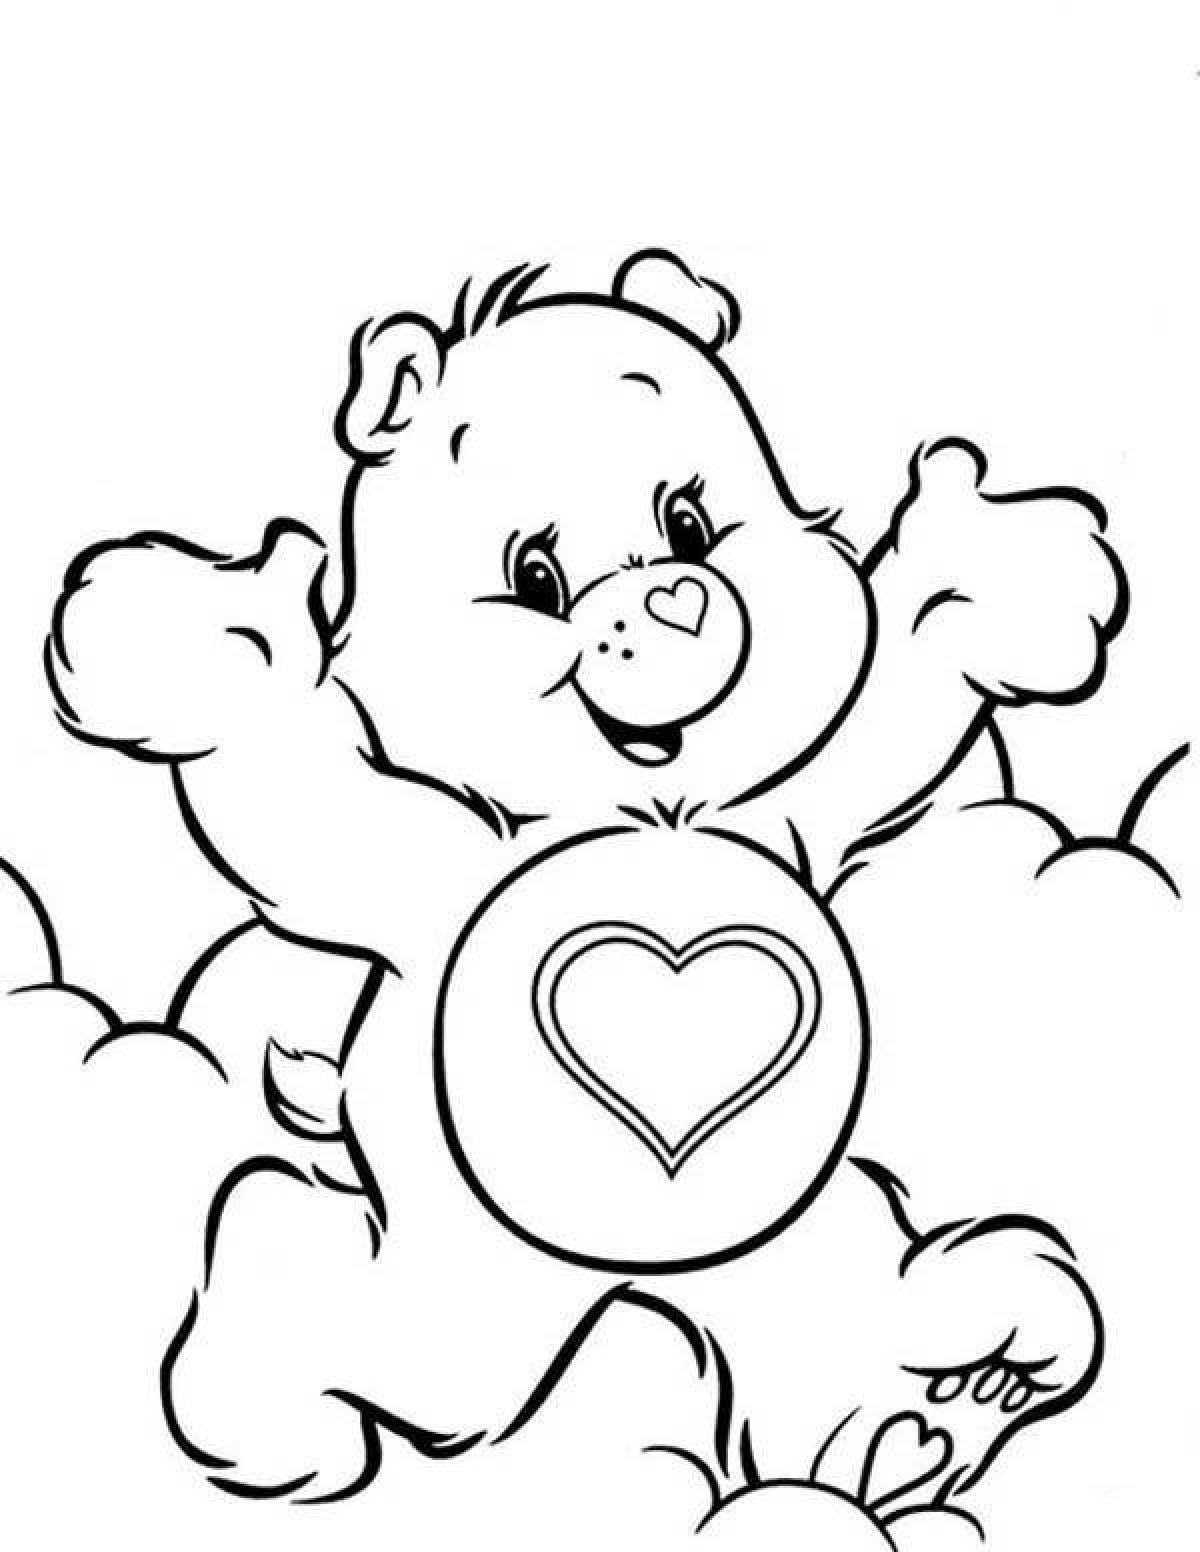 Funny bear with a heart coloring